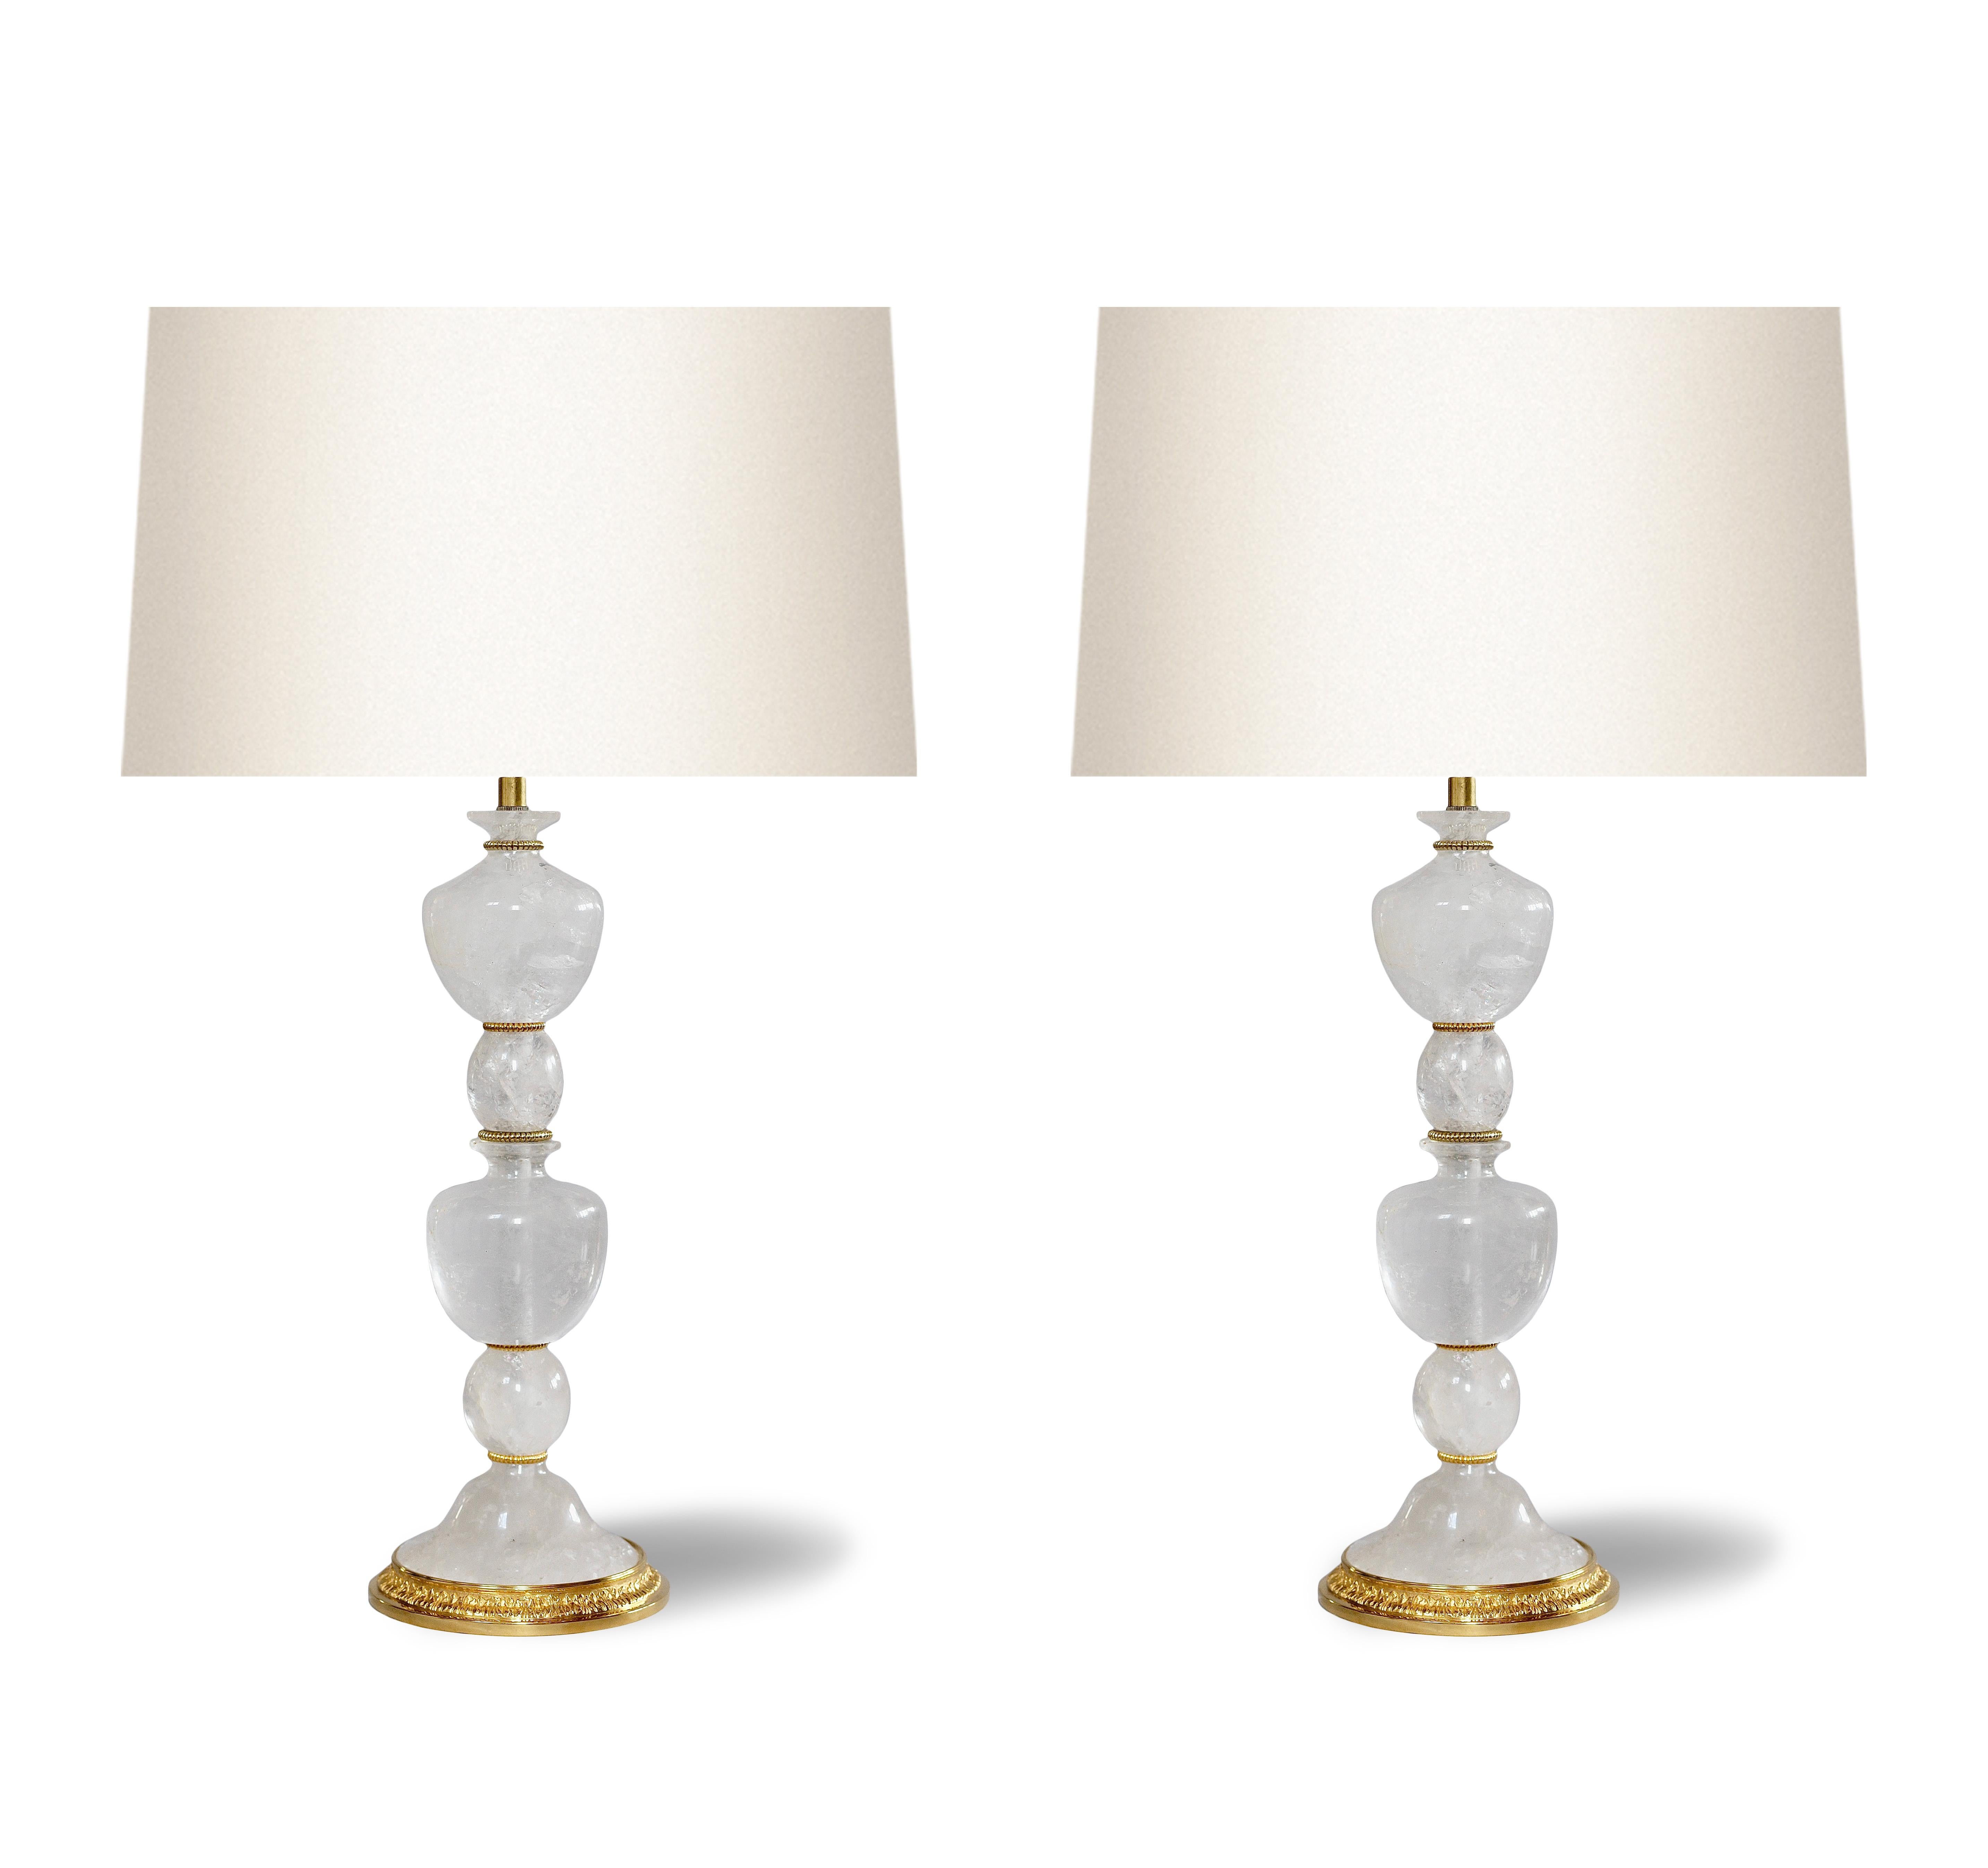 Pair of finely carved rock crystal lamps with gilt brass bases.

to the top of the rock crystal 18 inch

Created by Phoenix.

Lamp shades are not included 